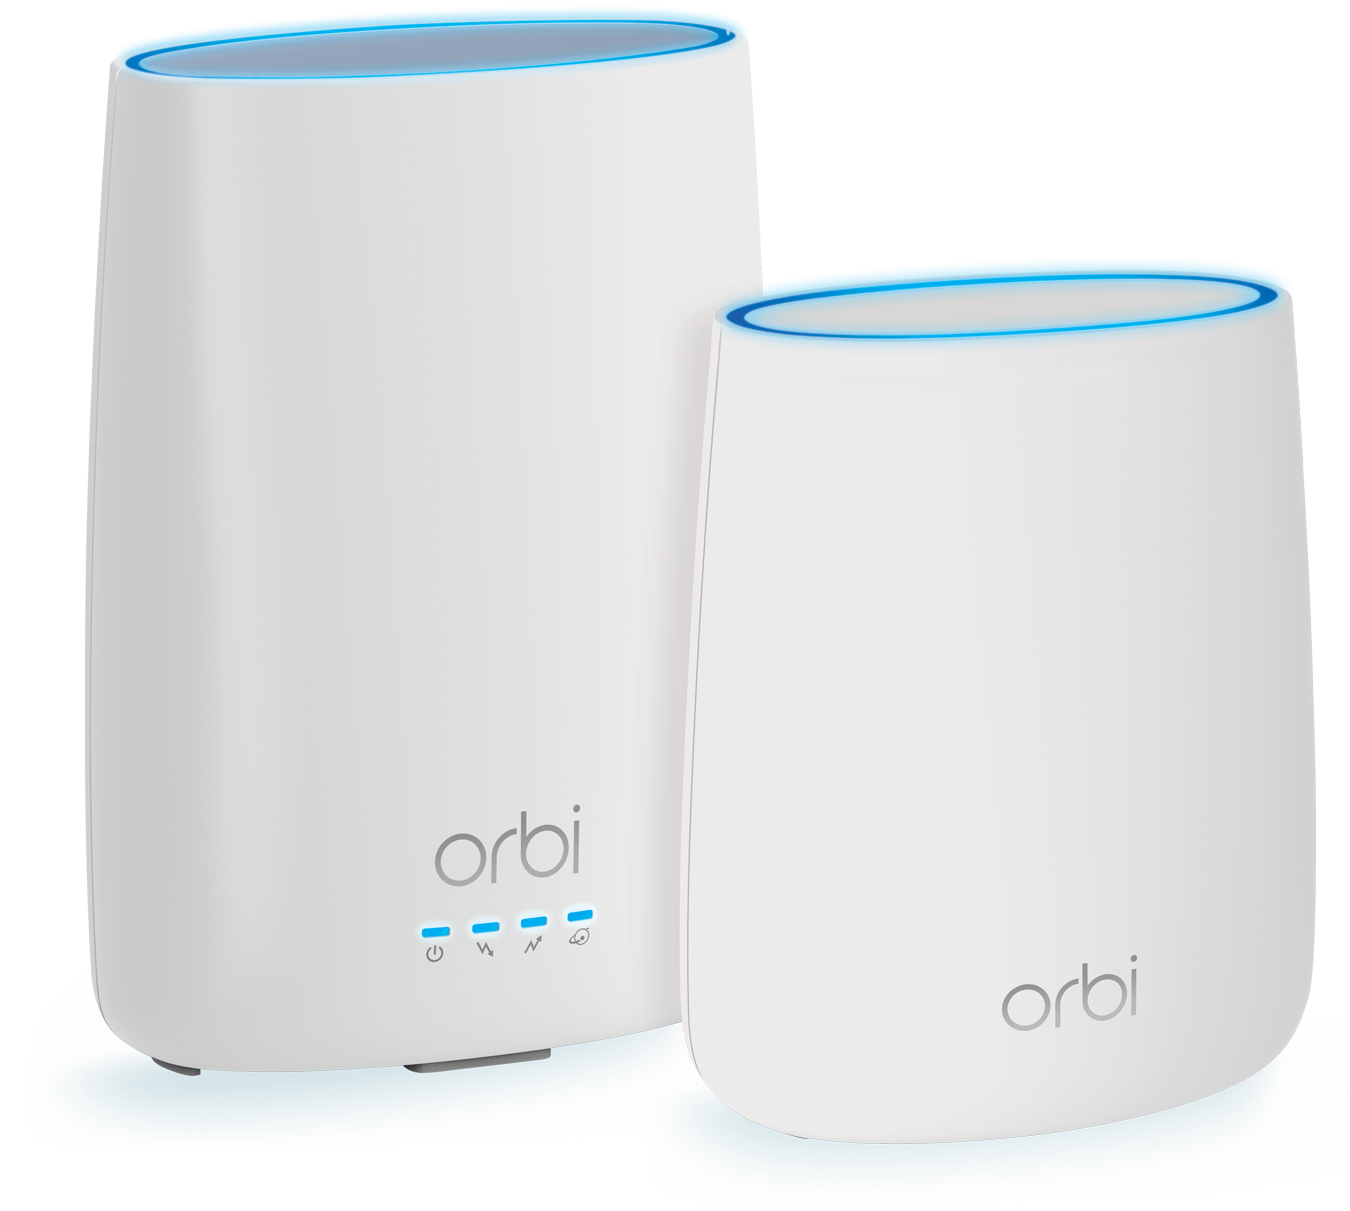 Figure 12: If you want to create a mesh network, the well-established Netgear Orbi comes in several models. This is the RBK50 starter kit.